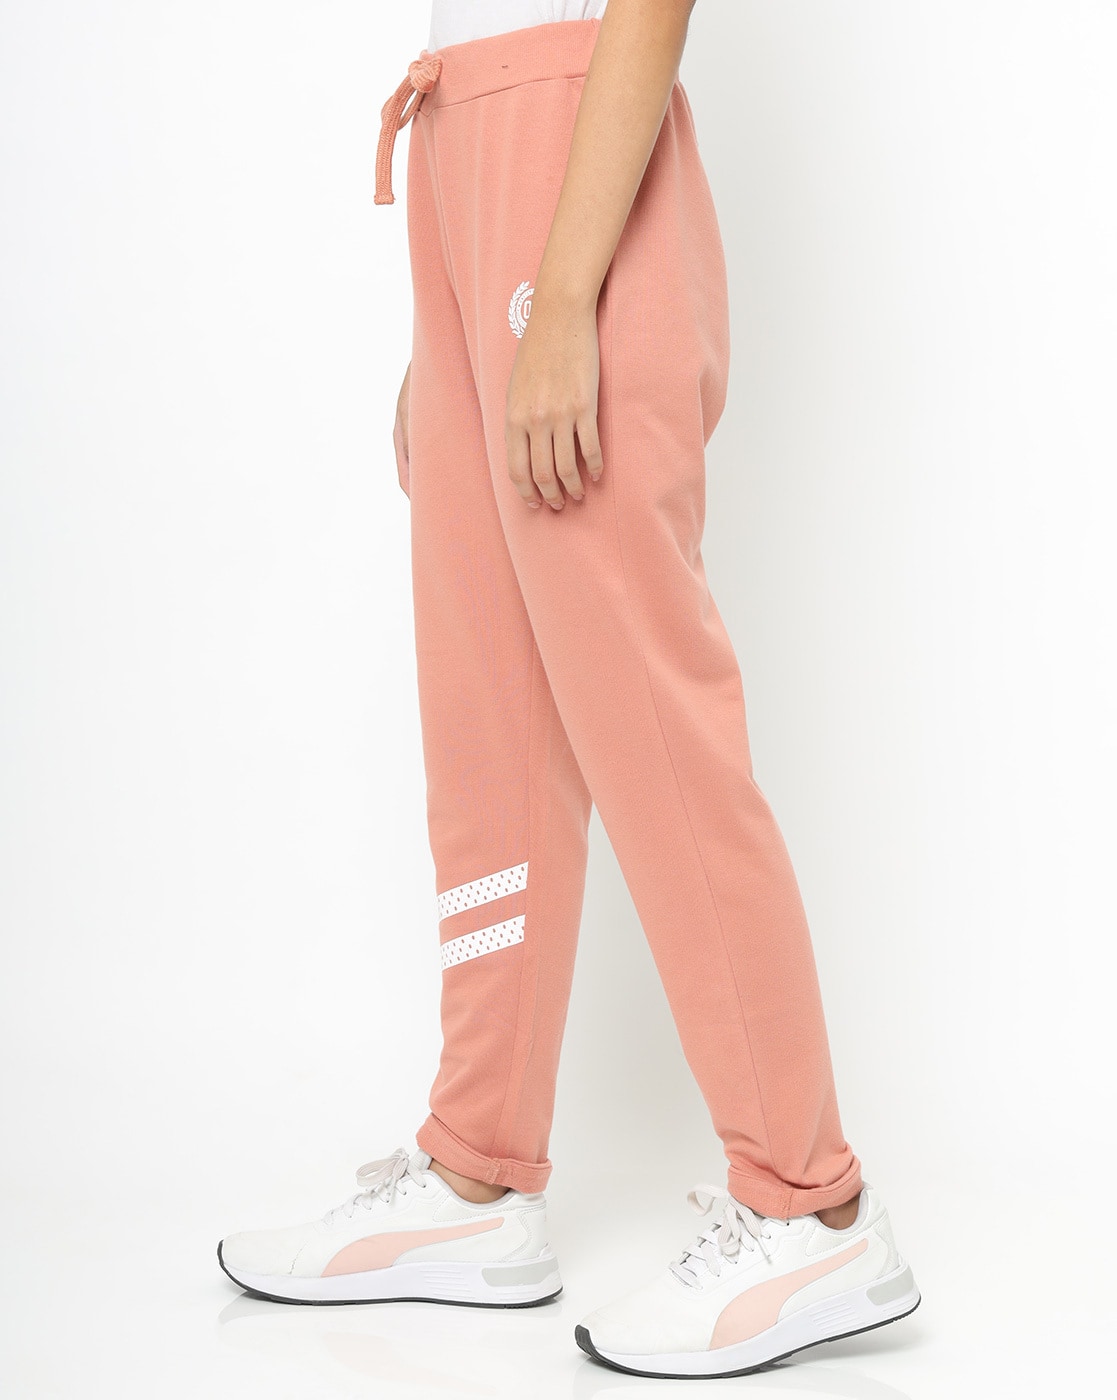 Track pants #sweat #pants #outfit #for #school #cute  #sweatpantsoutfitforschoolcute | Streetwear fashion, Cute casual outfits,  Trendy outfits